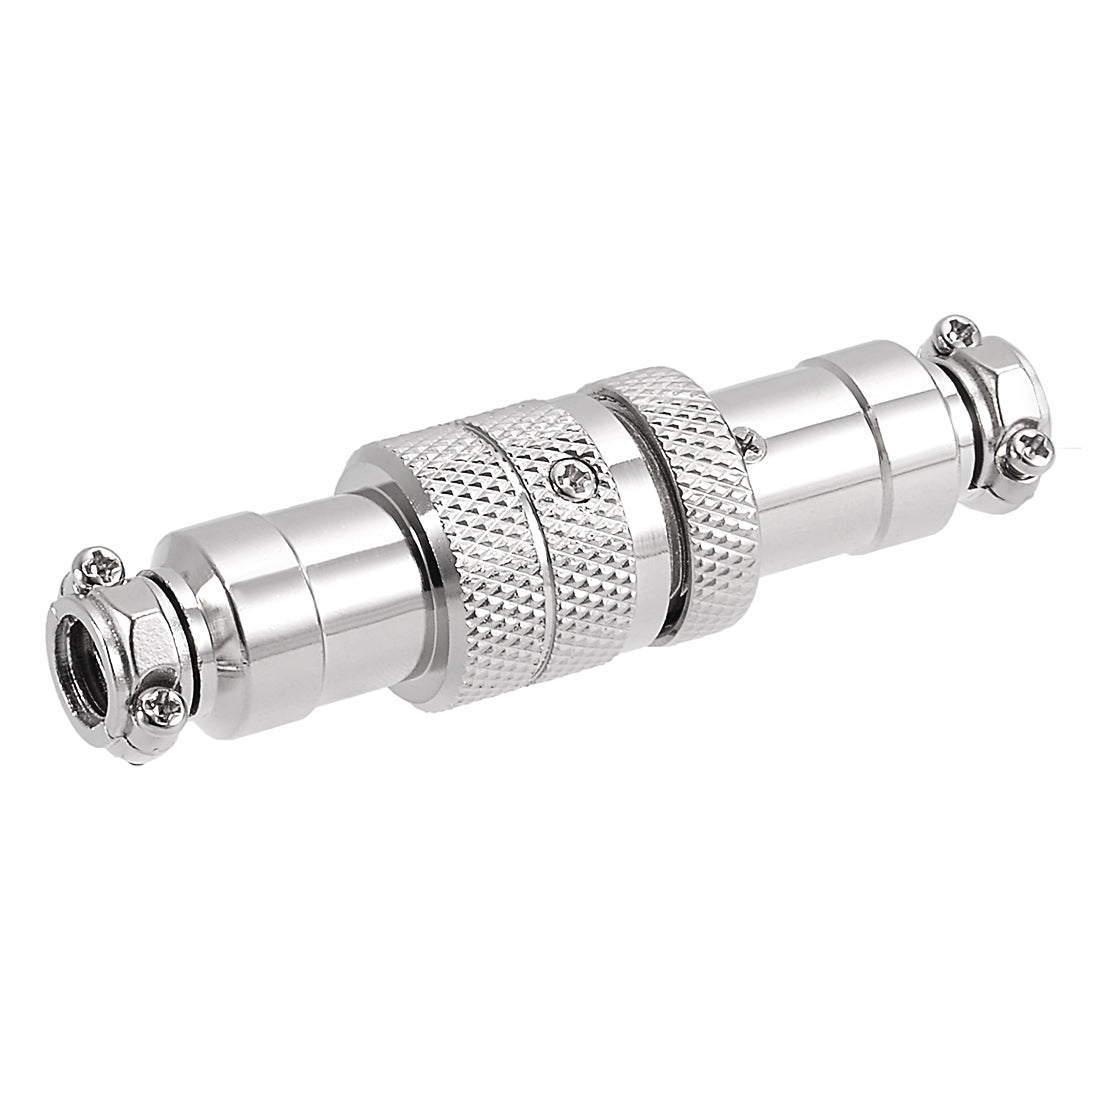 uxcell Uxcell Aviation Connector, 16mm 3Terminals 7A 125V GX16-3 Waterproof Male Wire Panel Power Chassis Metal Fittings Connector Aviation Silver Tone